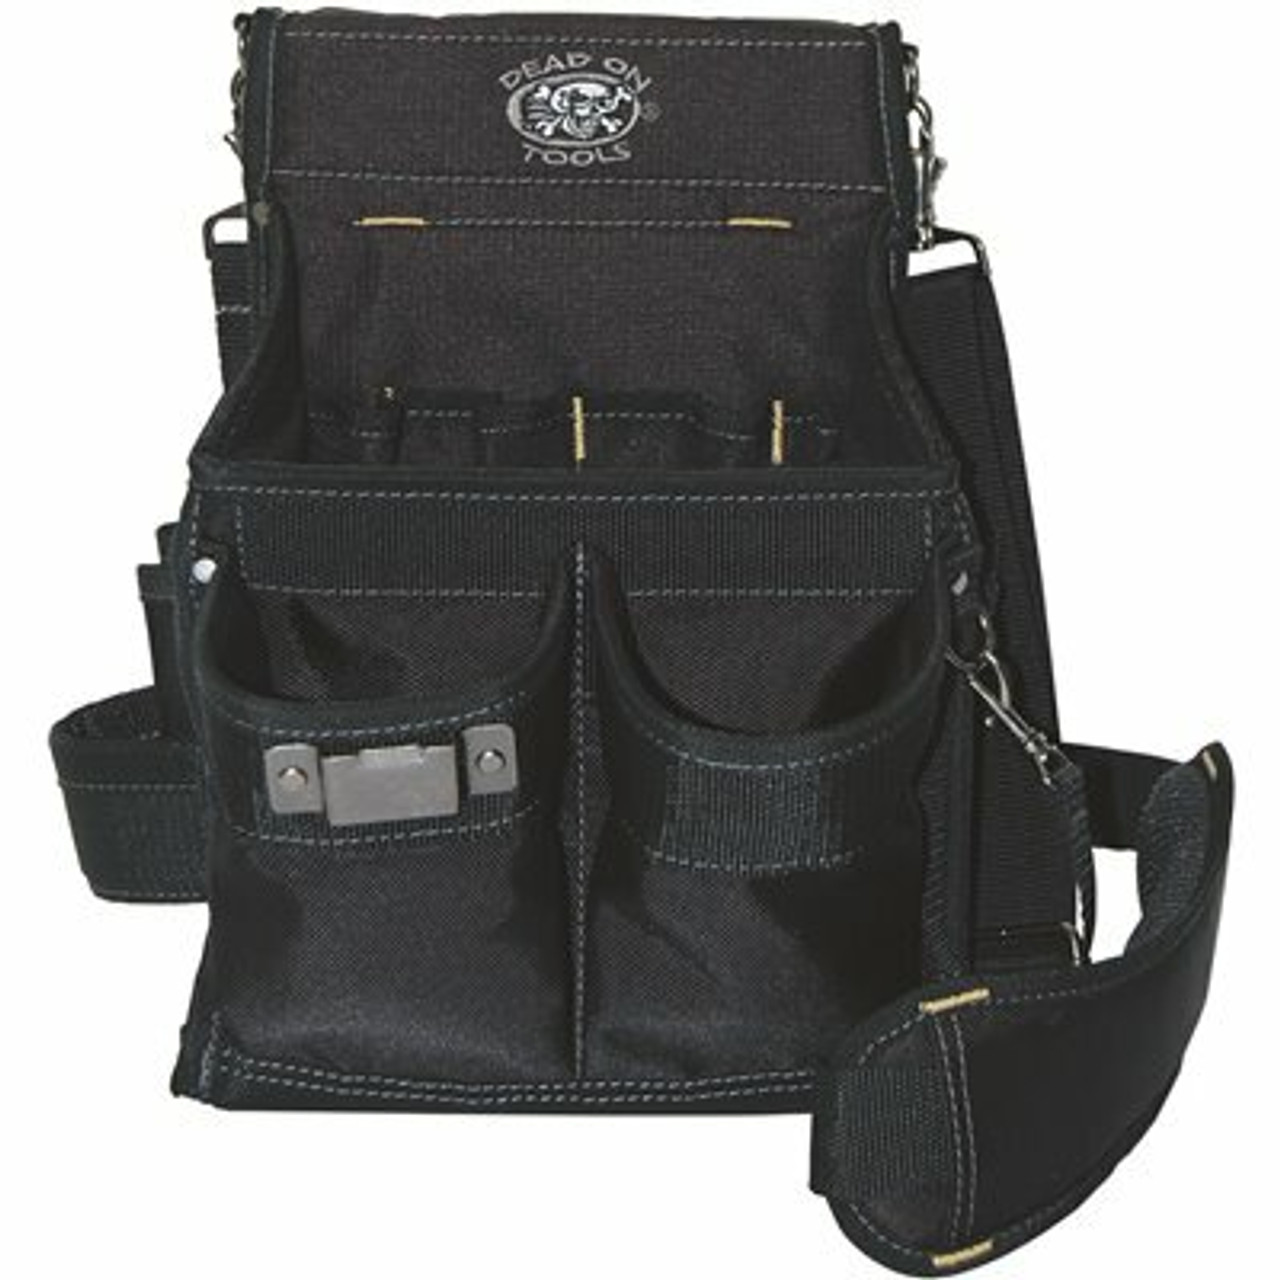 Dead On Tools 11 In. 14-Pocket Electricians Professional Tool Pouch In Black With Steel Loop And Clip To Hold Tools Securely